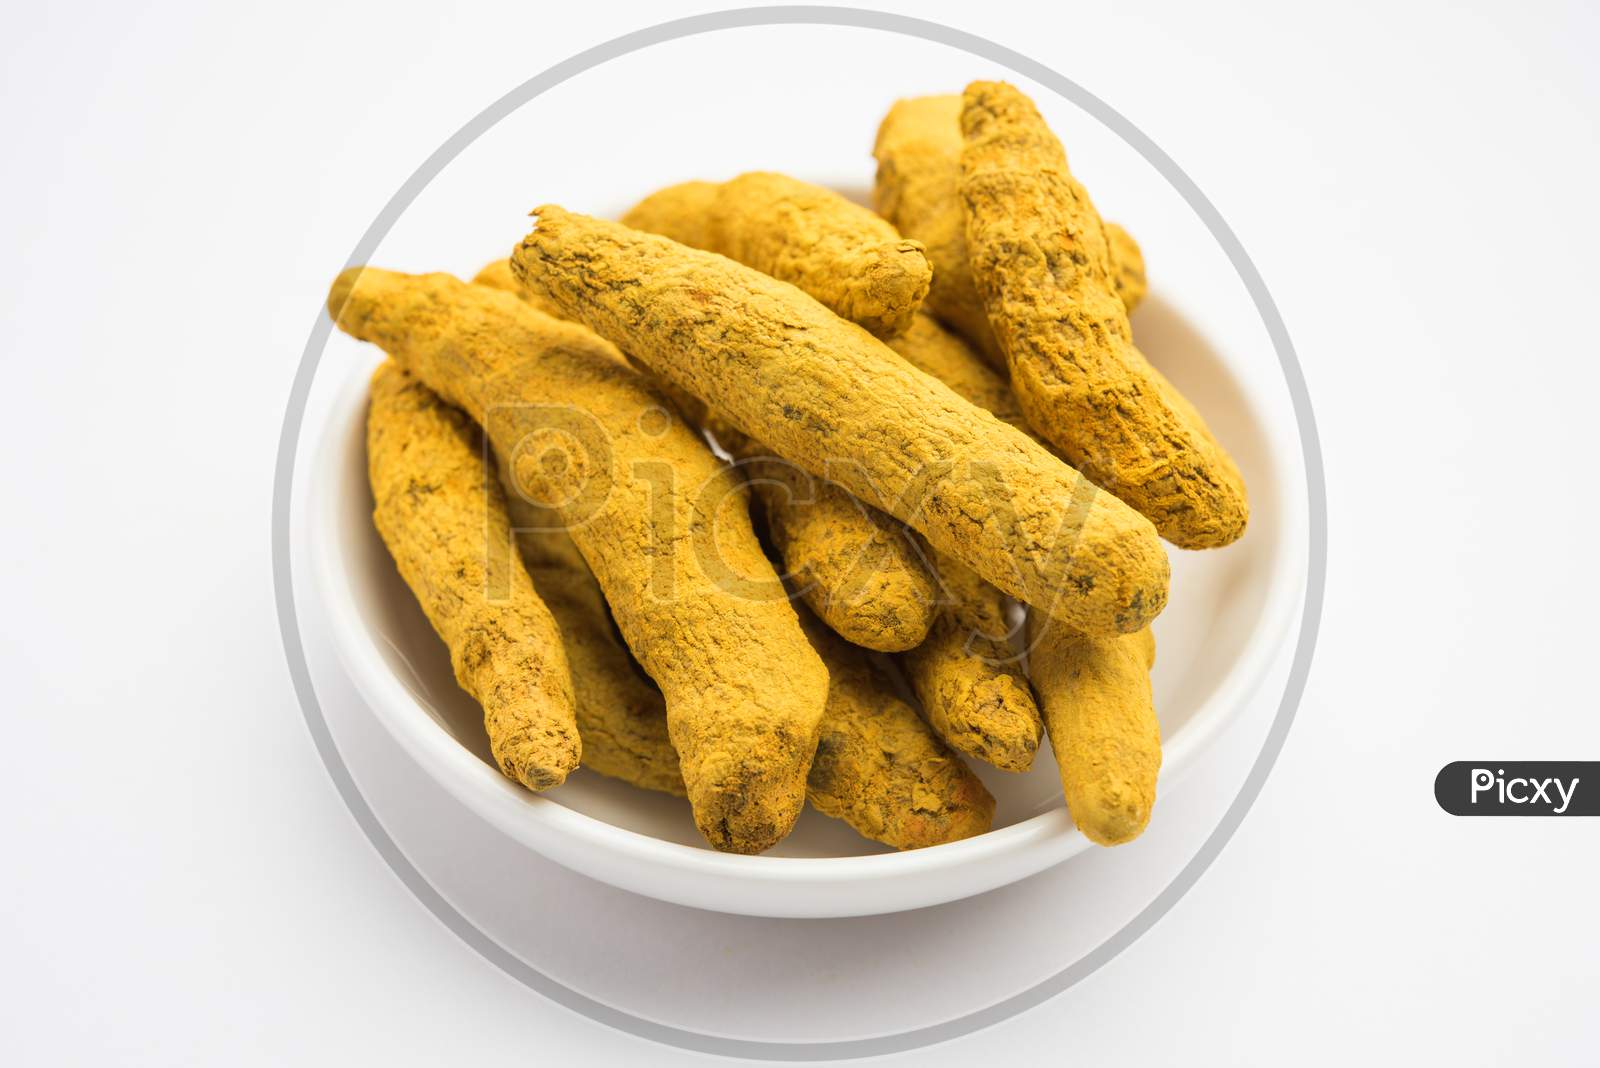 Haldi Or Dried Turmeric Roots As A Whole On White Background